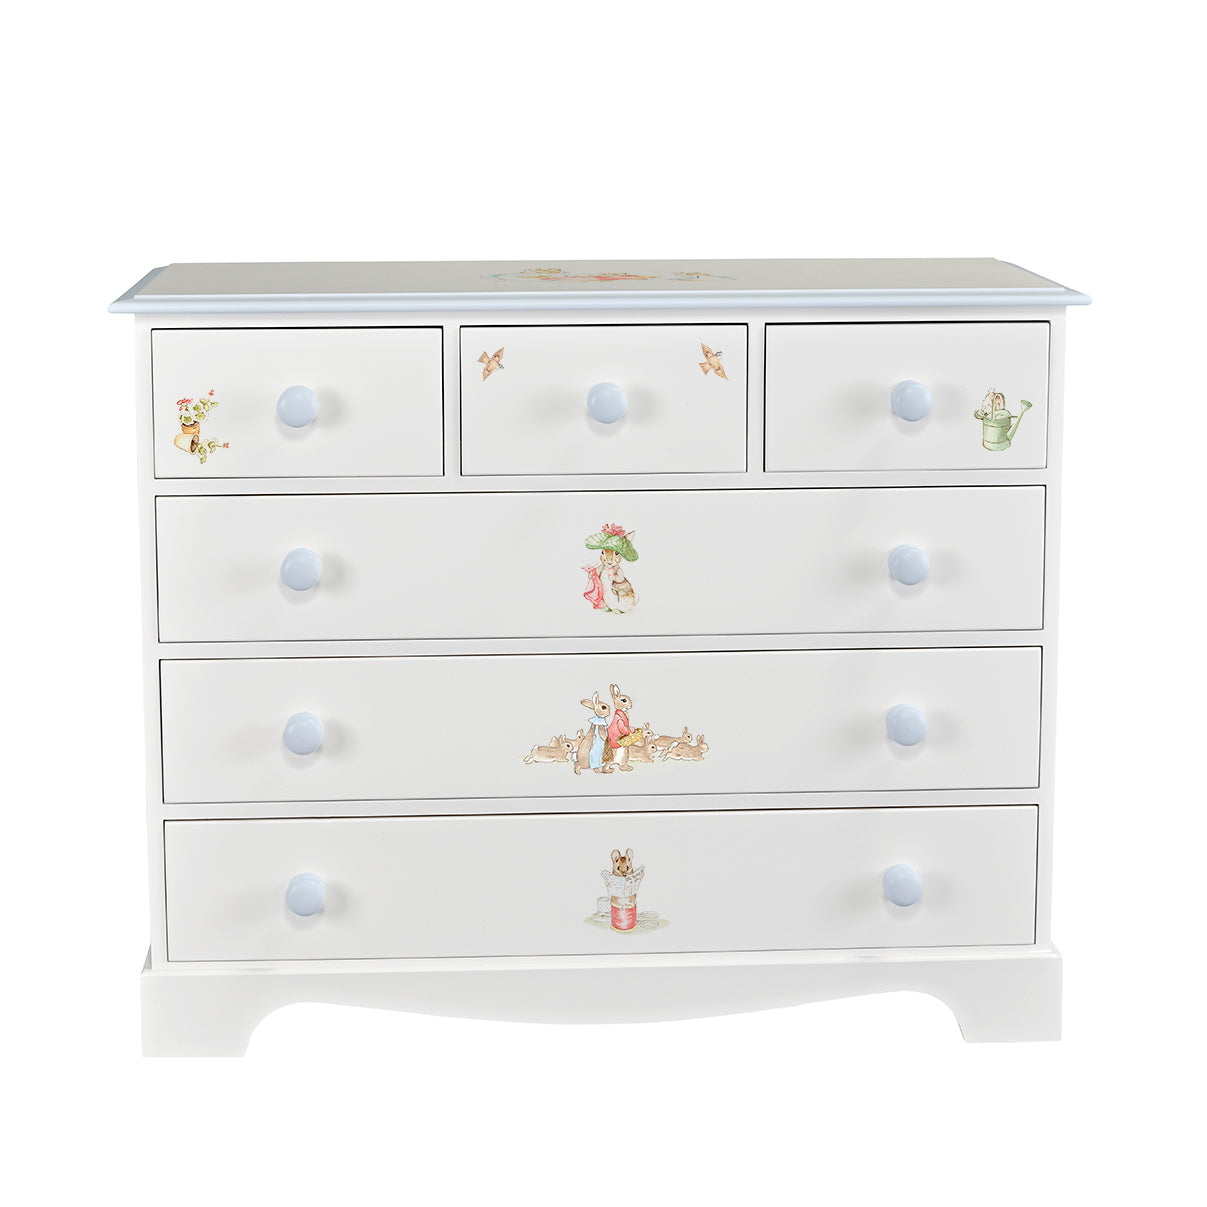 Extra Large Chest of Drawers - Beatrix Potter with Blissful Blue Trim